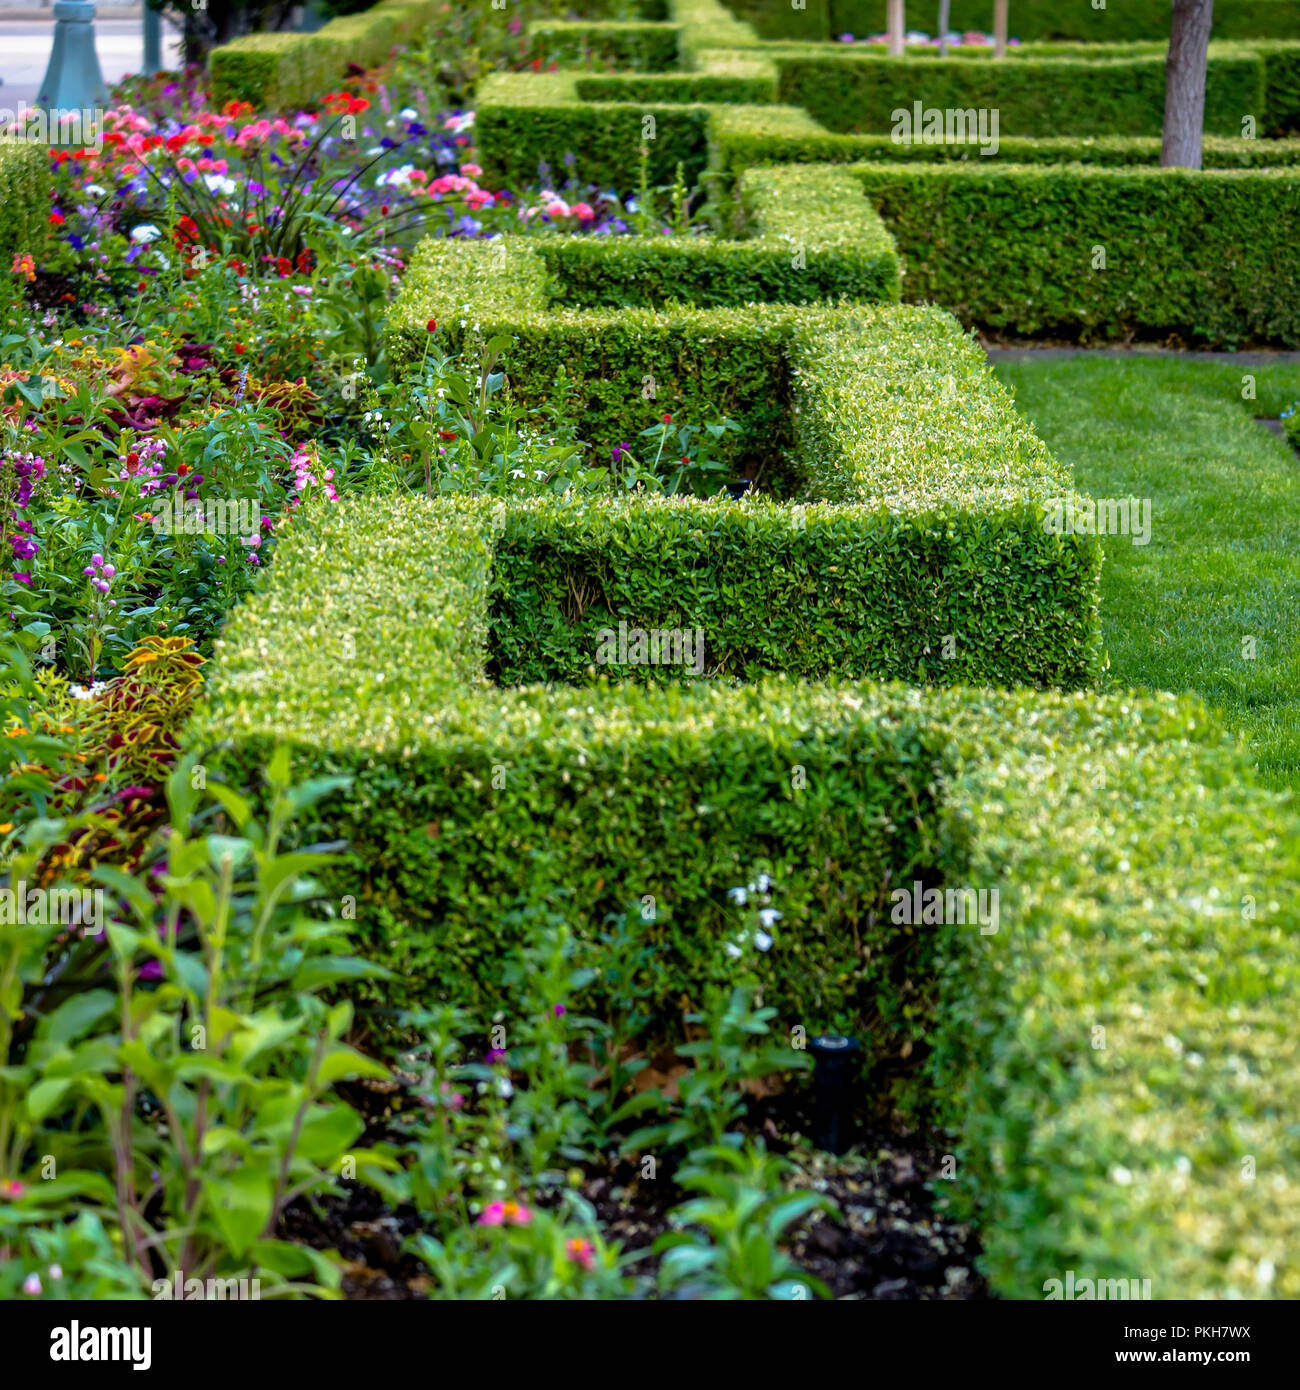 Rectangular hedge and flowers in a park Stock Photo